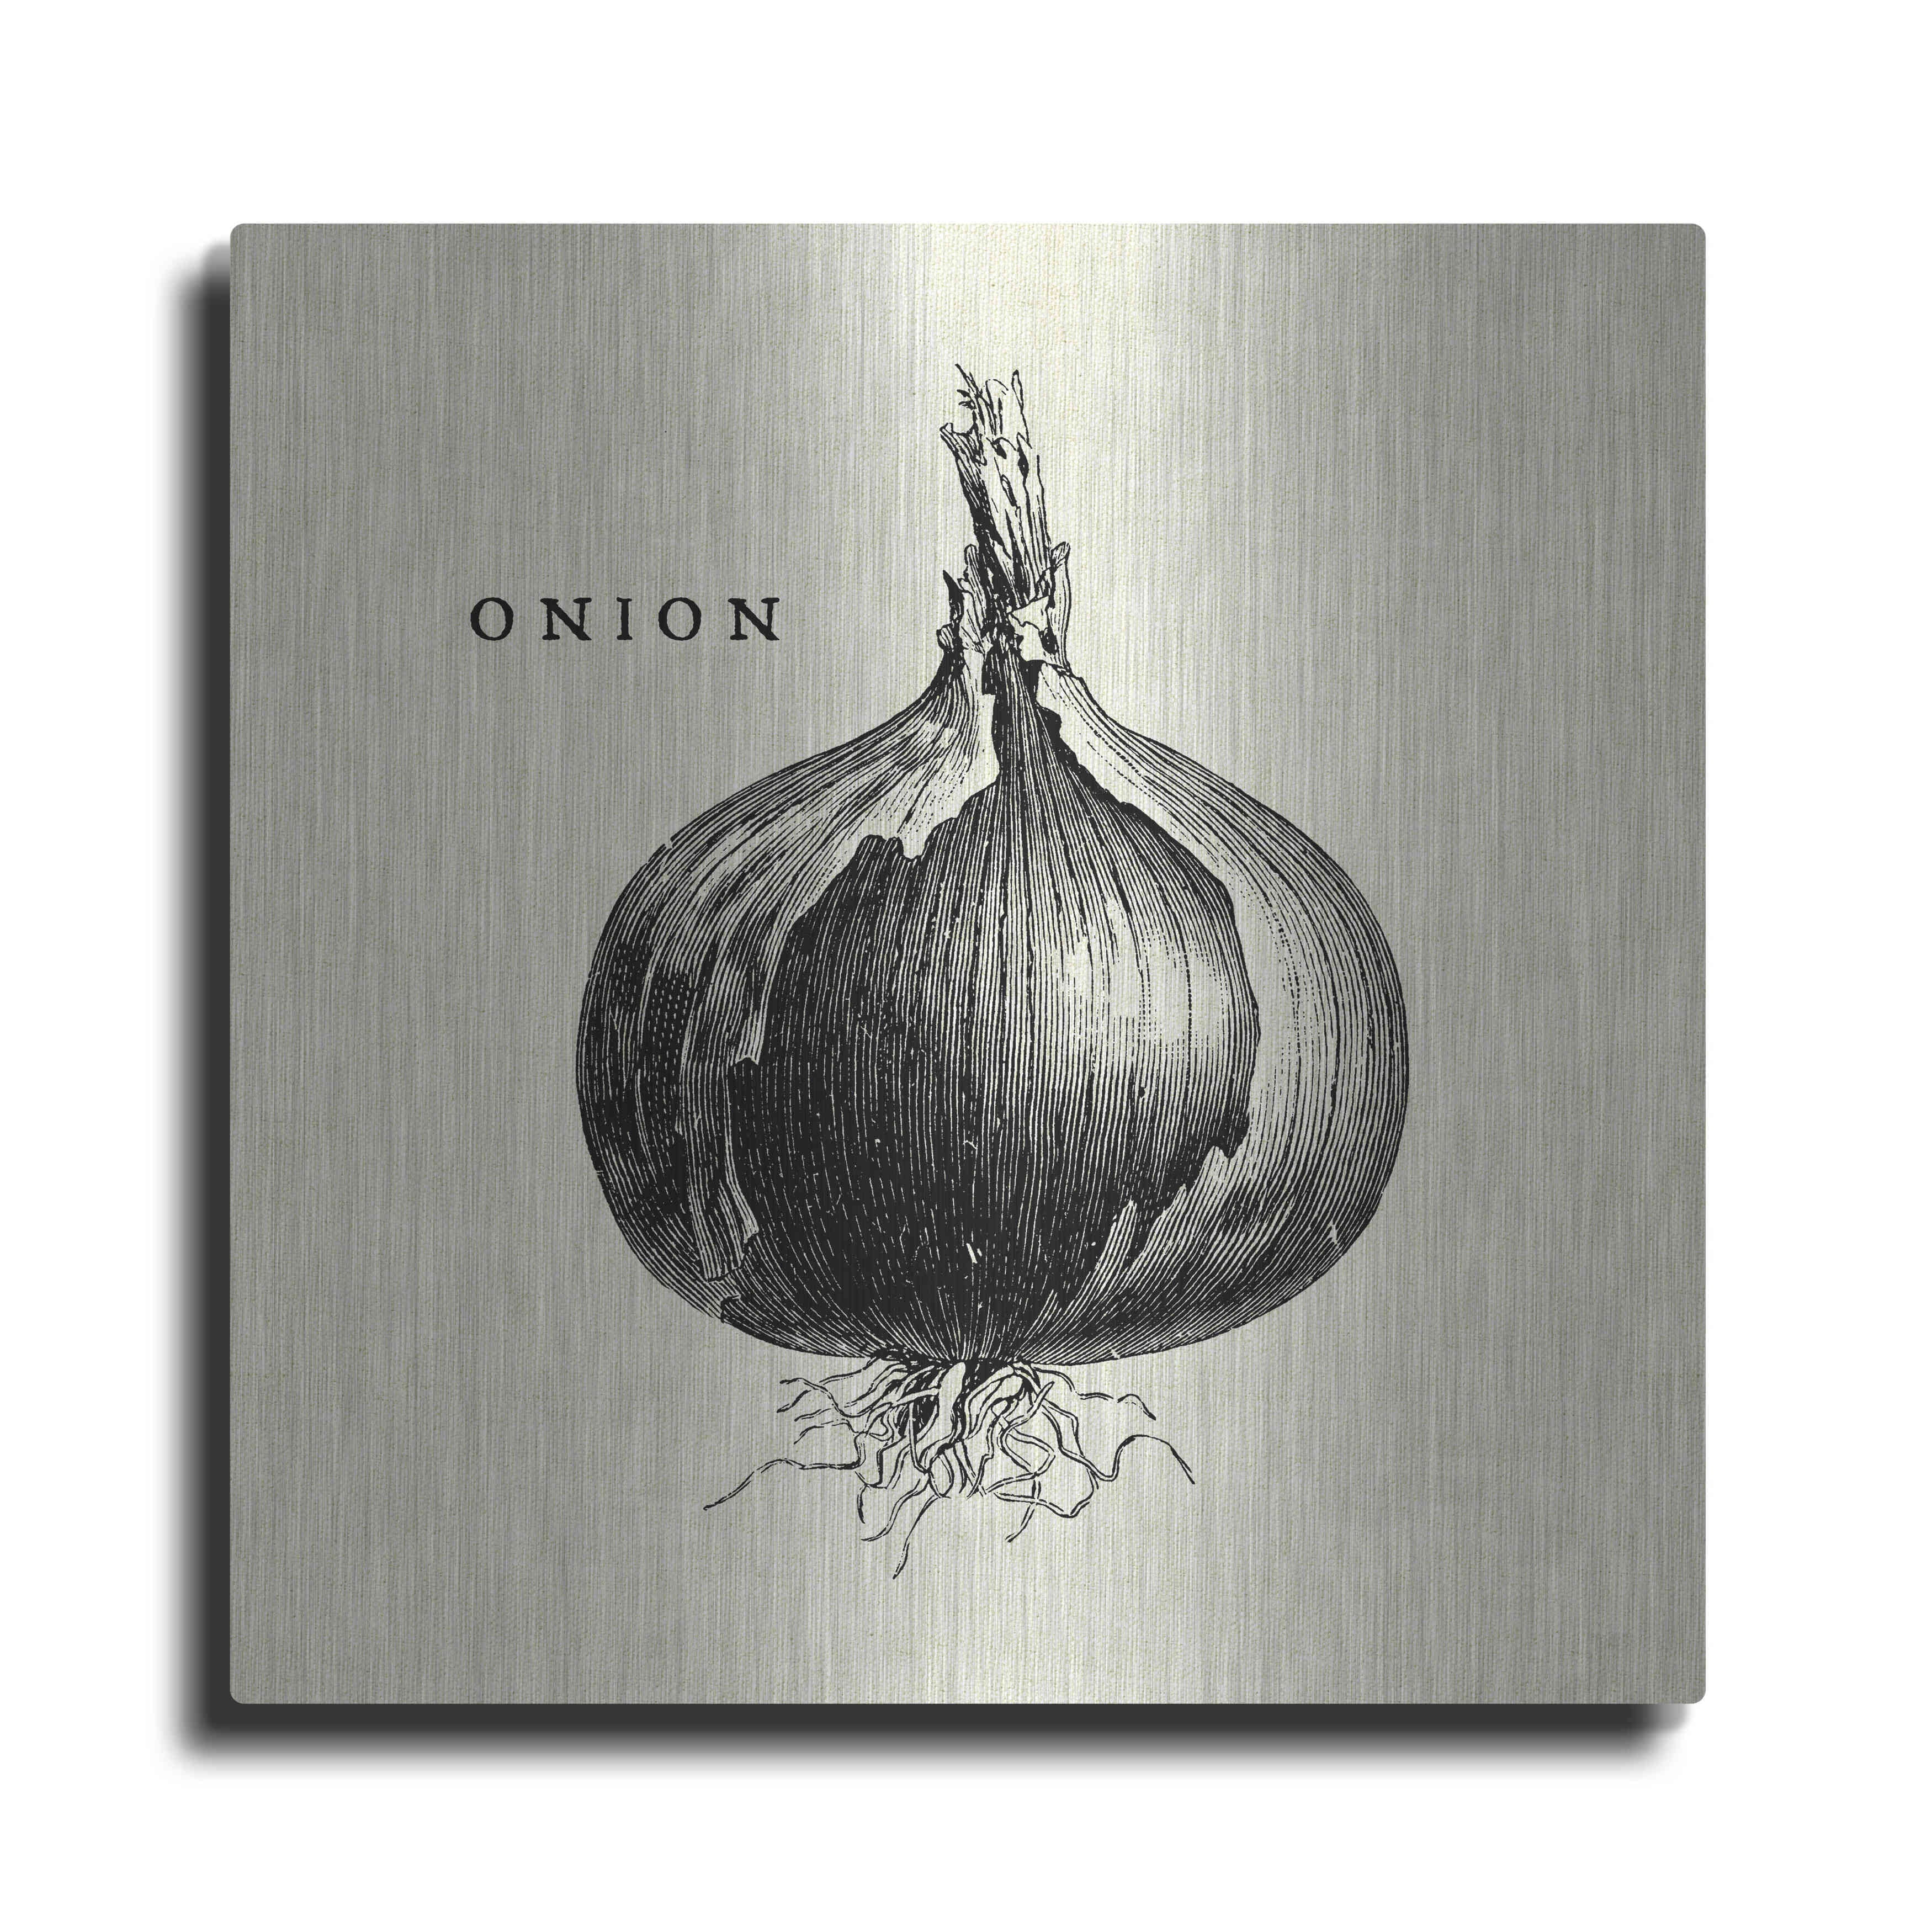 How To Draw An Onion Step By Step: Pencil Sketch Onion Drawing - YouTube